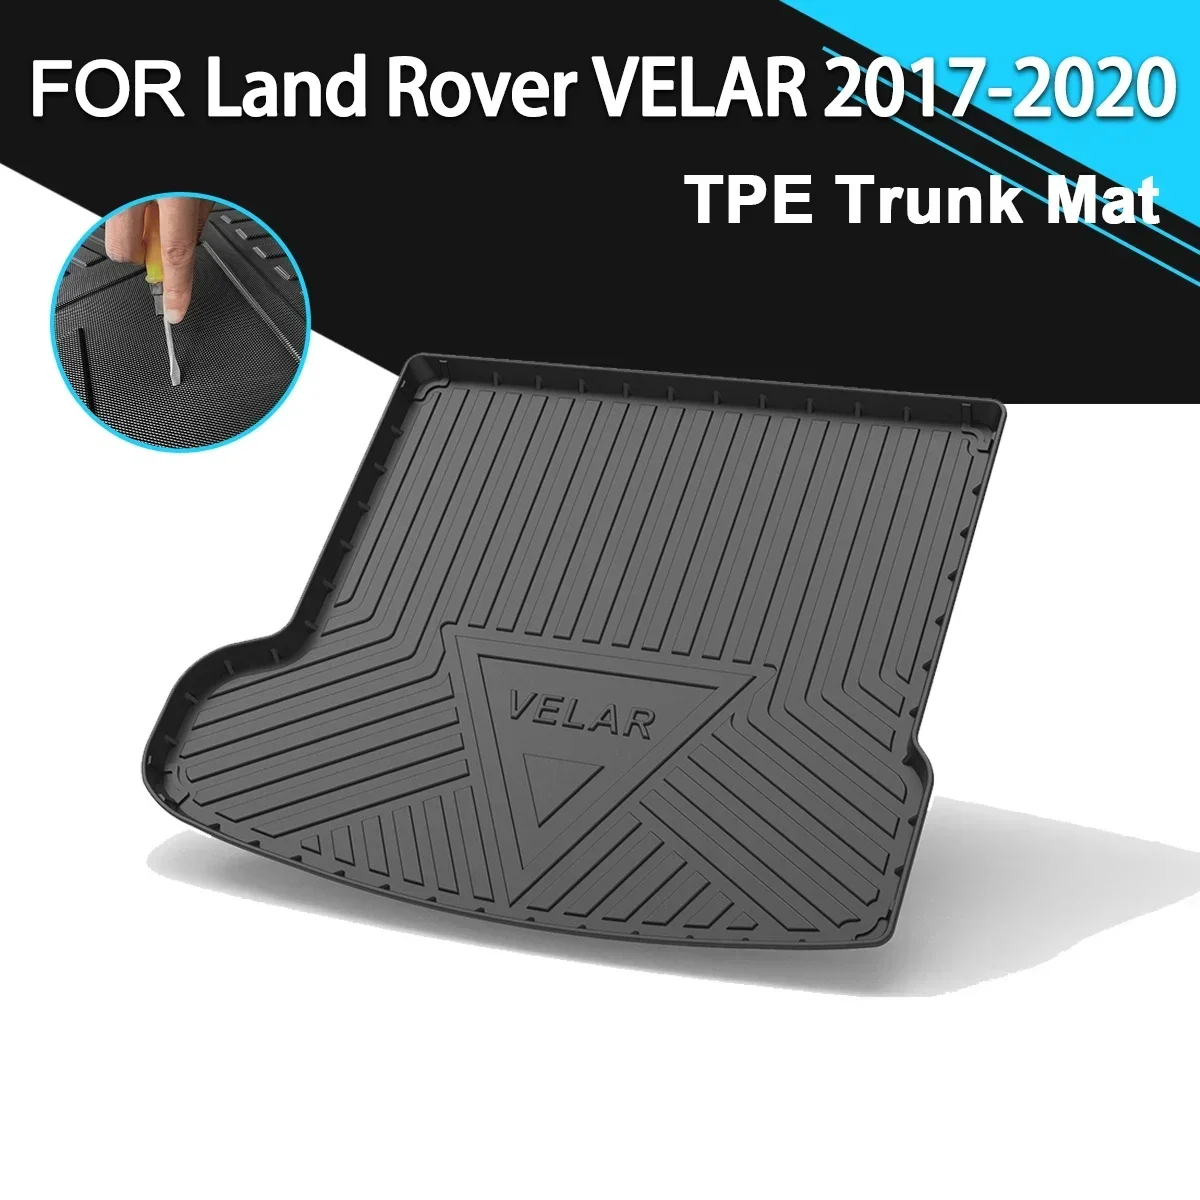 

Car Rear Trunk Cover Mat Rubber TPE Waterproof Non-Slip Cargo Liner Accessories For Land Rover VELAR 2017-2020